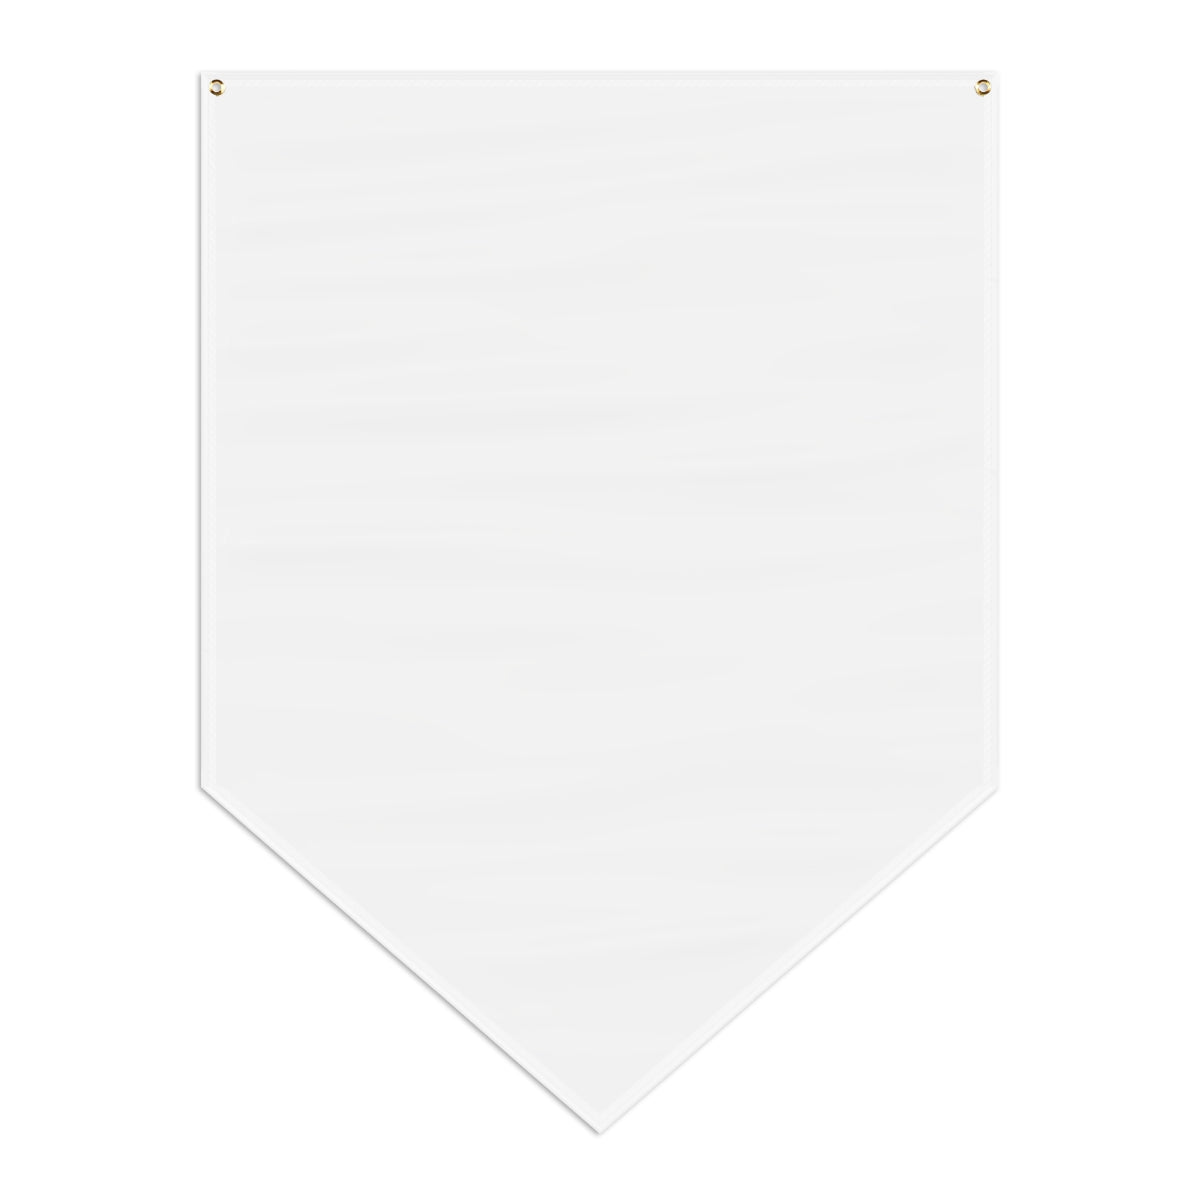 Herrington Lake Signature Collection Pennant Banner in White